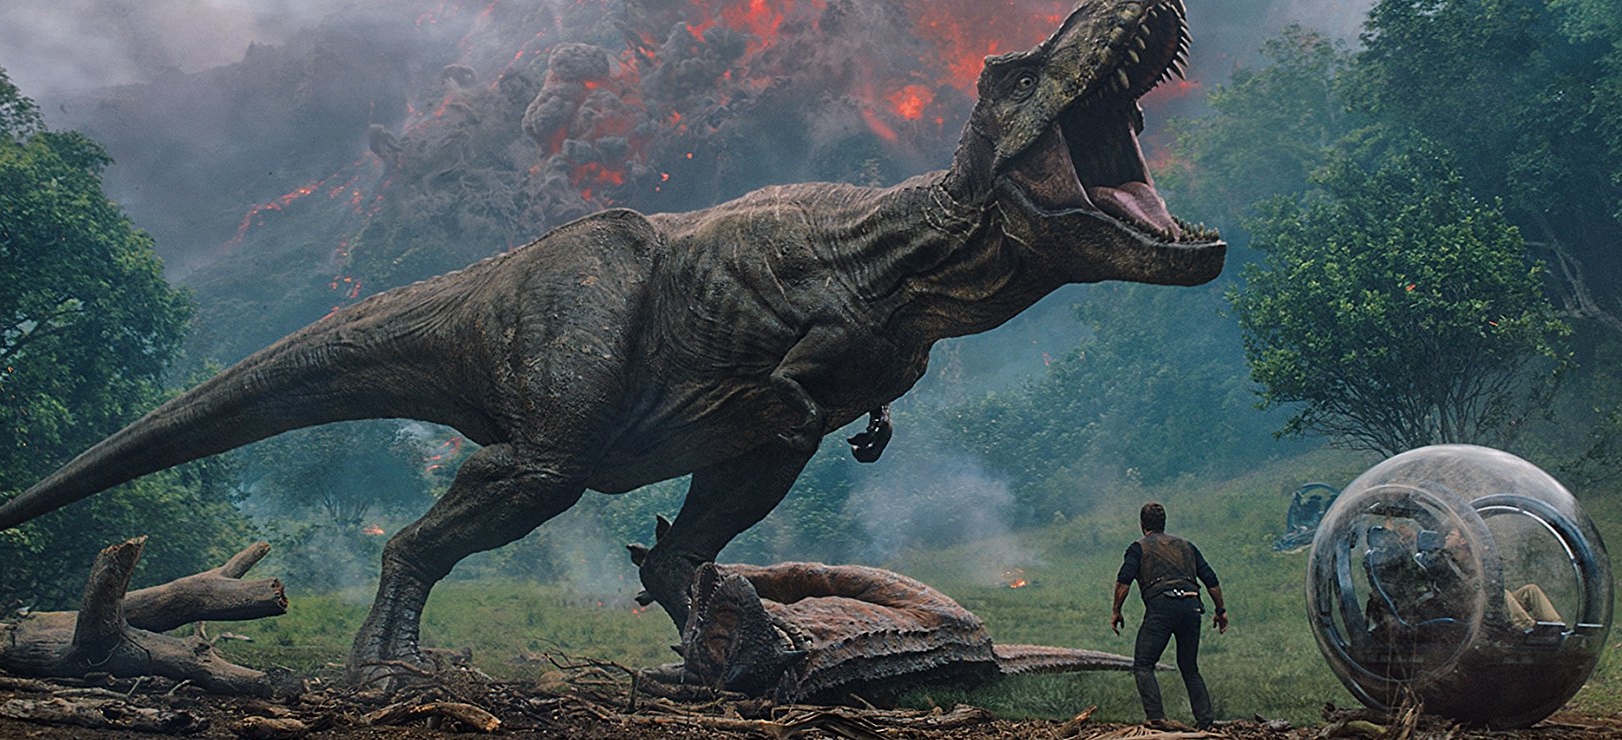 JURASSIC WORLD: FALLEN KINGDOM Offers A Few Thrills, But Doesn’t Compare With Its Predecessor